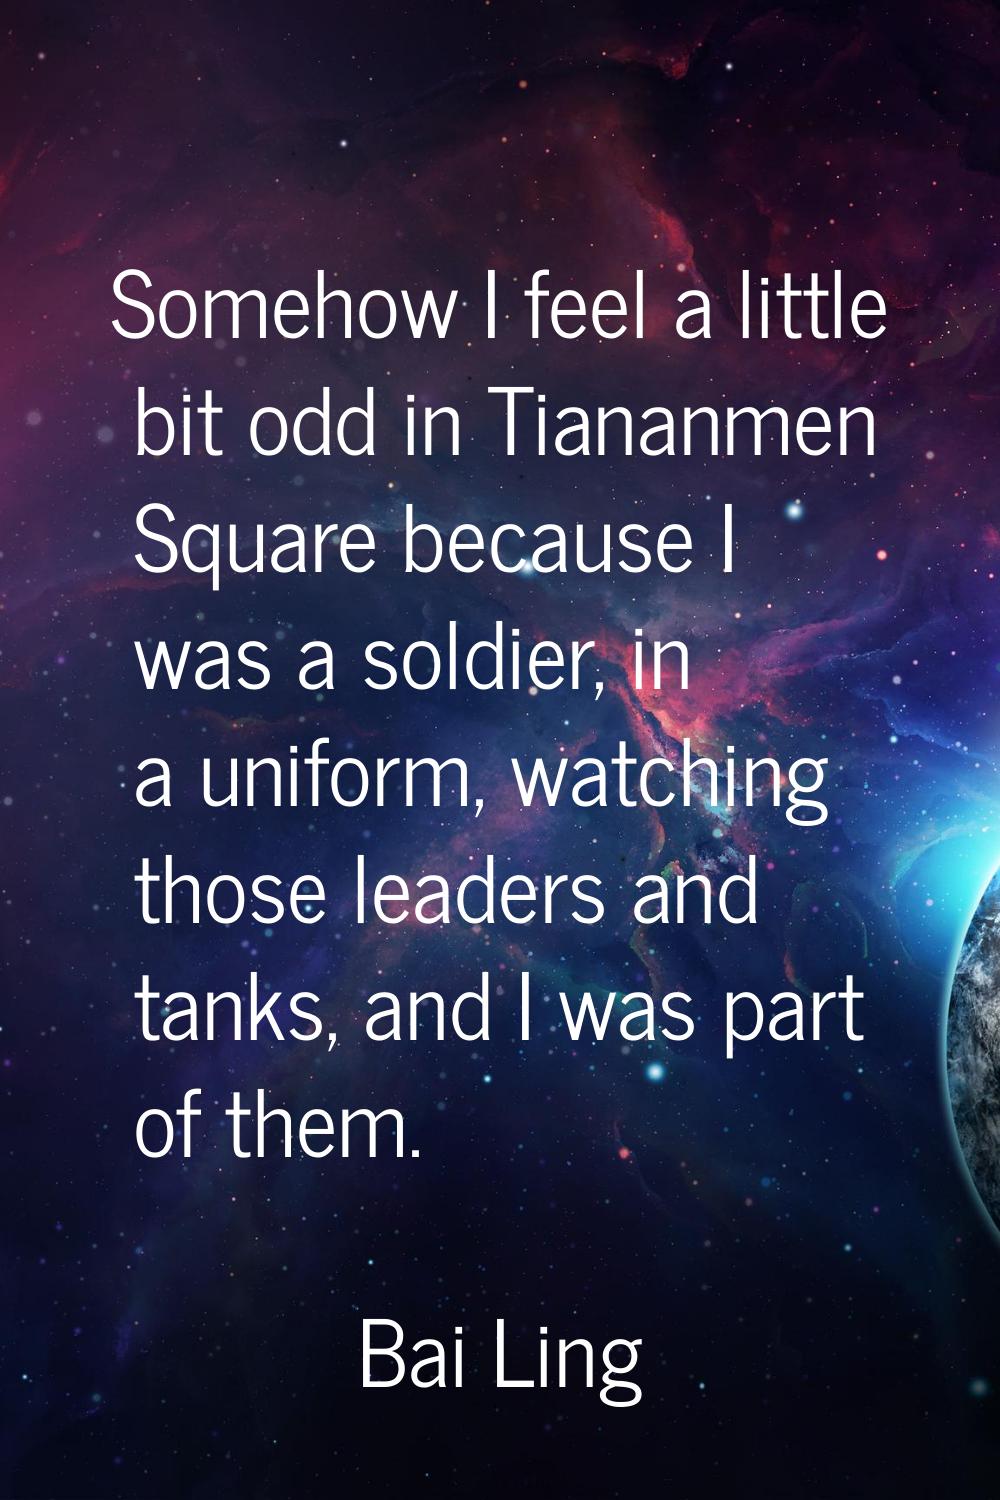 Somehow I feel a little bit odd in Tiananmen Square because I was a soldier, in a uniform, watching